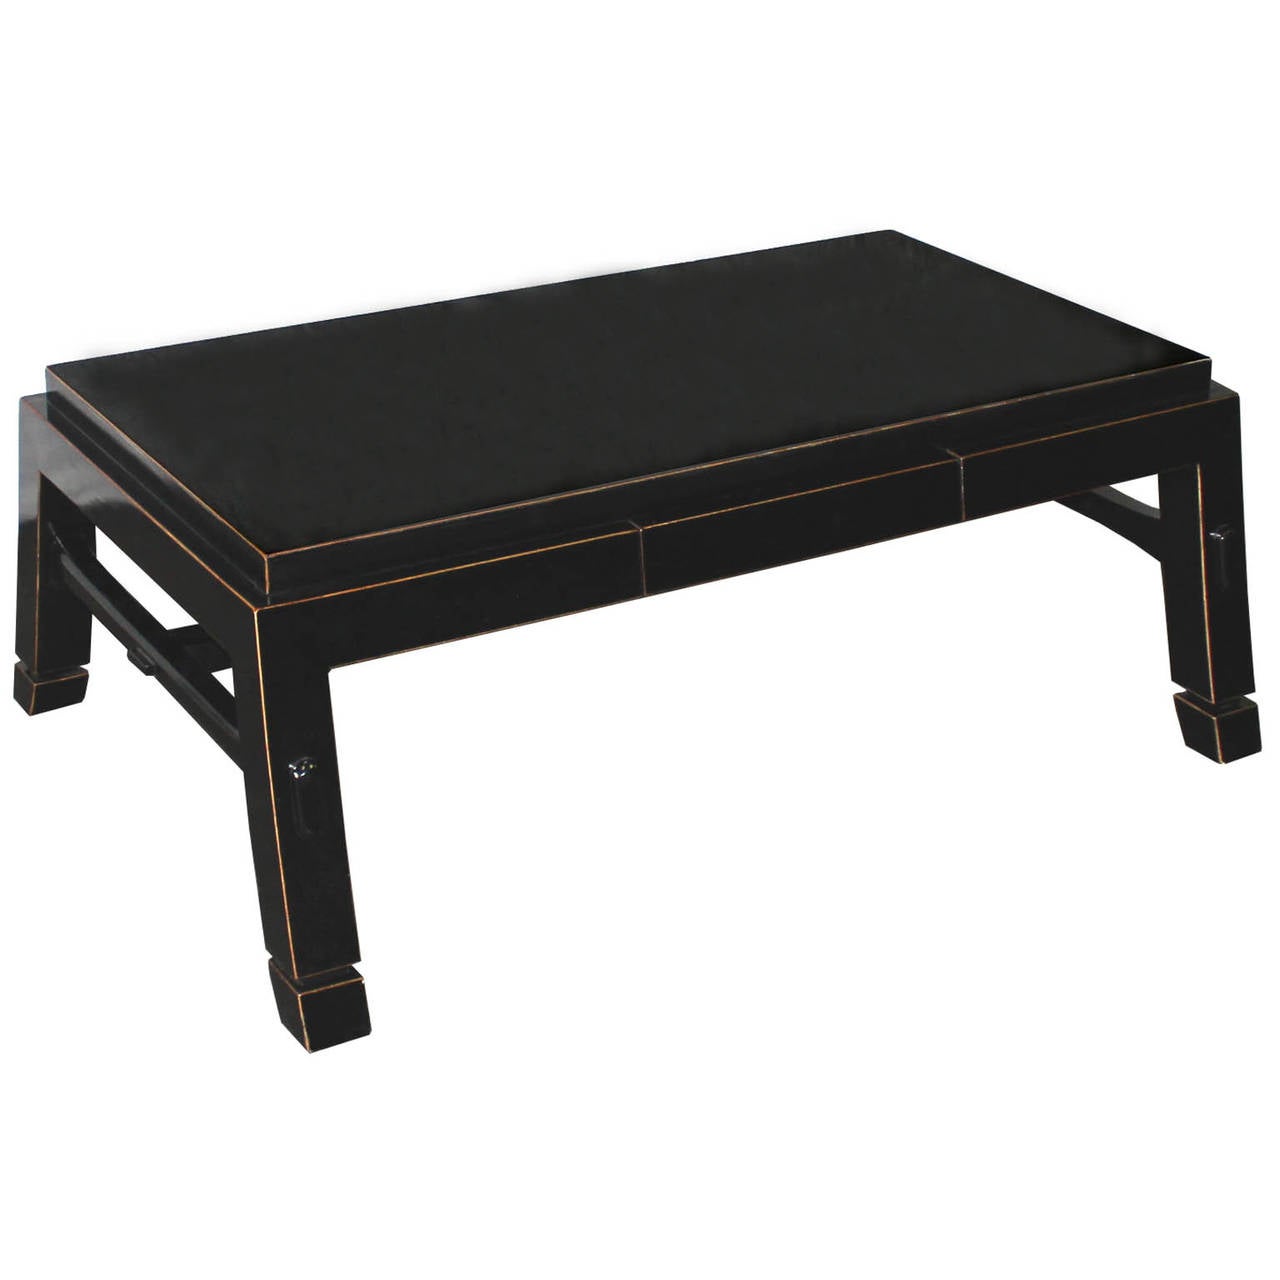 Black lacquer rectangular coffee table with splay legs, hand rubbed edges with one drawer is a custom designed by furniture designer, Eric Brand.